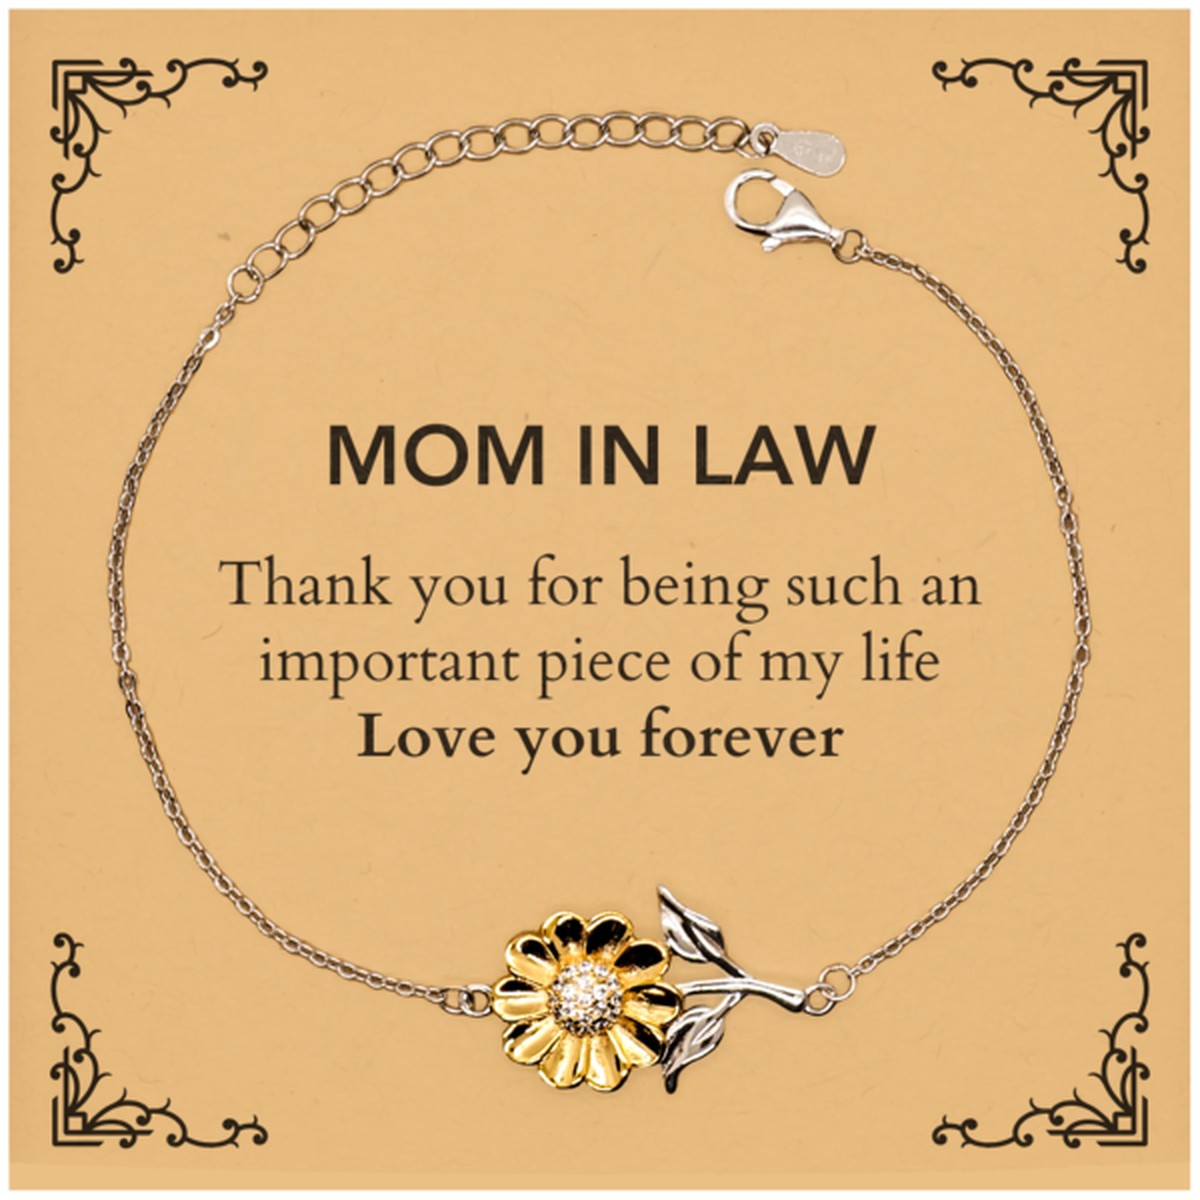 Appropriate Mom In Law Sunflower Bracelet Epic Birthday Gifts for Mom In Law Thank you for being such an important piece of my life Mom In Law Christmas Mothers Fathers Day